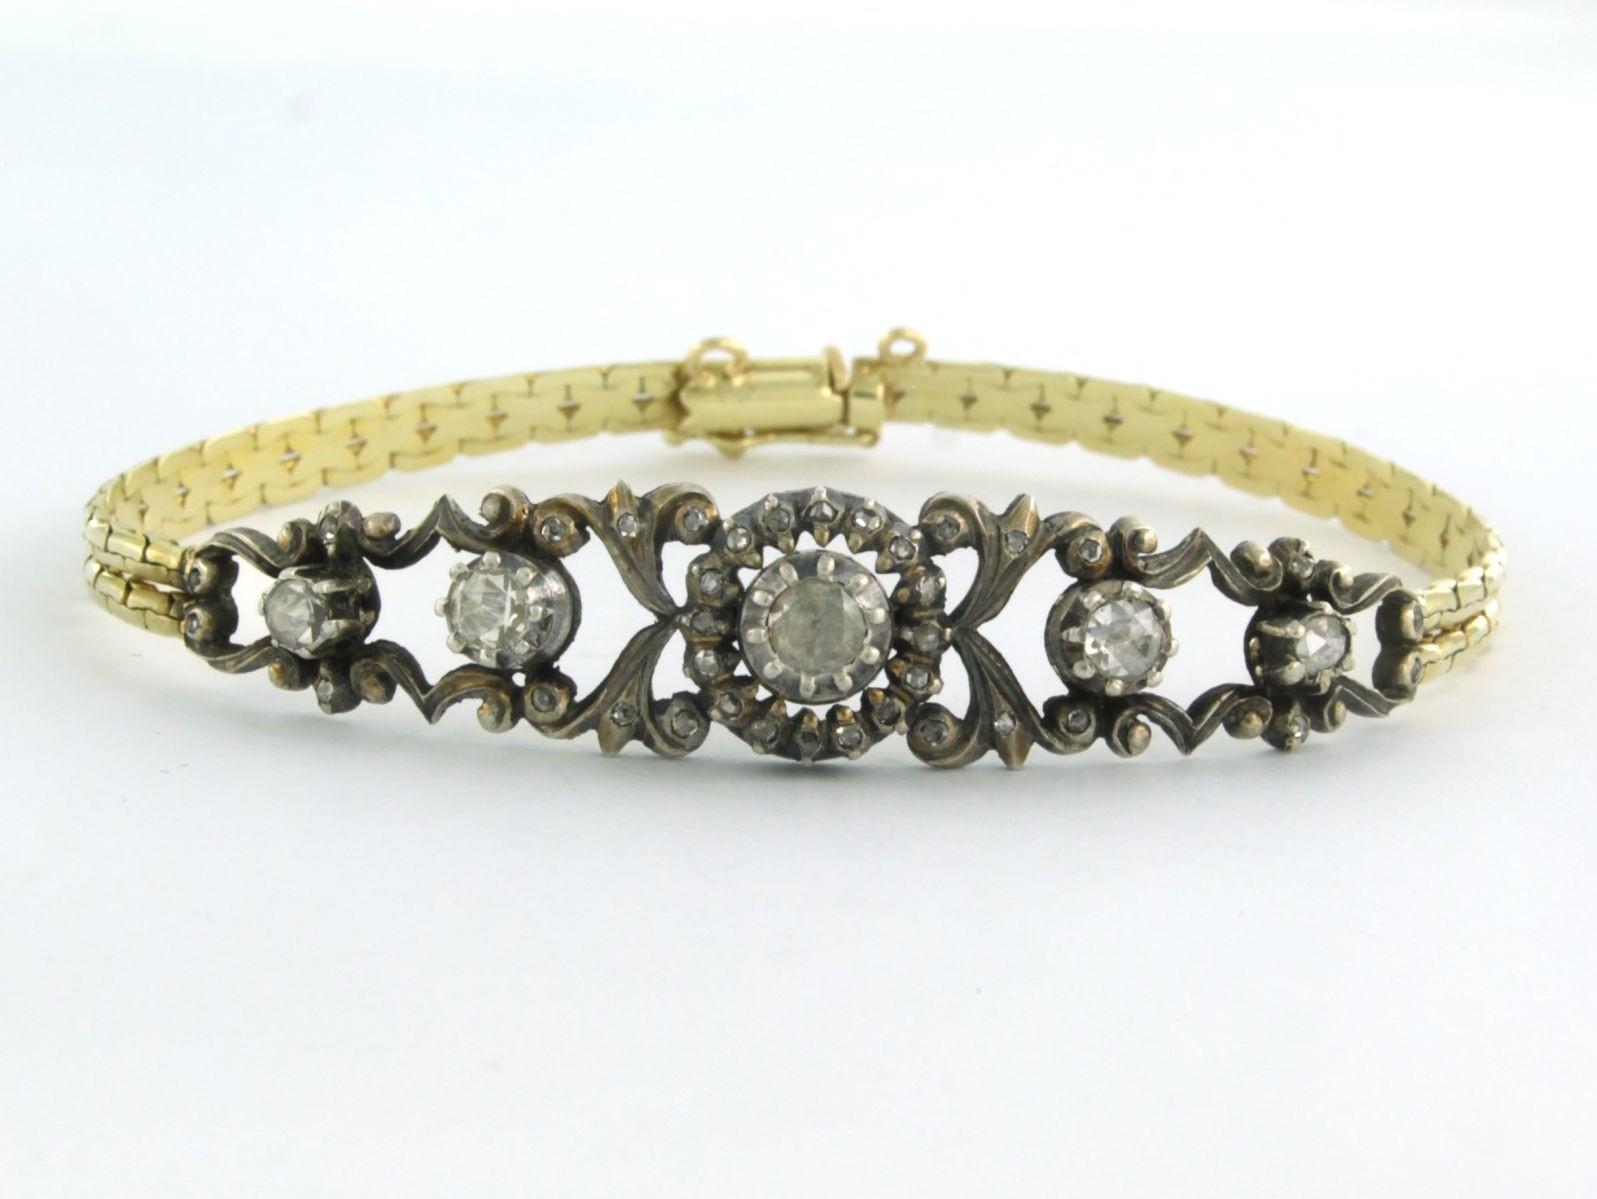 14k yellow gold with silver bracelet set with rose cut diamond 0.40 ct G/H SI - 18.5 cm

detailed description:

the length of the bracelet is 18.5 cm long and the strap is 4.4 mm wide

the center piece is approximately 5.5 cm long and 1.2 cm